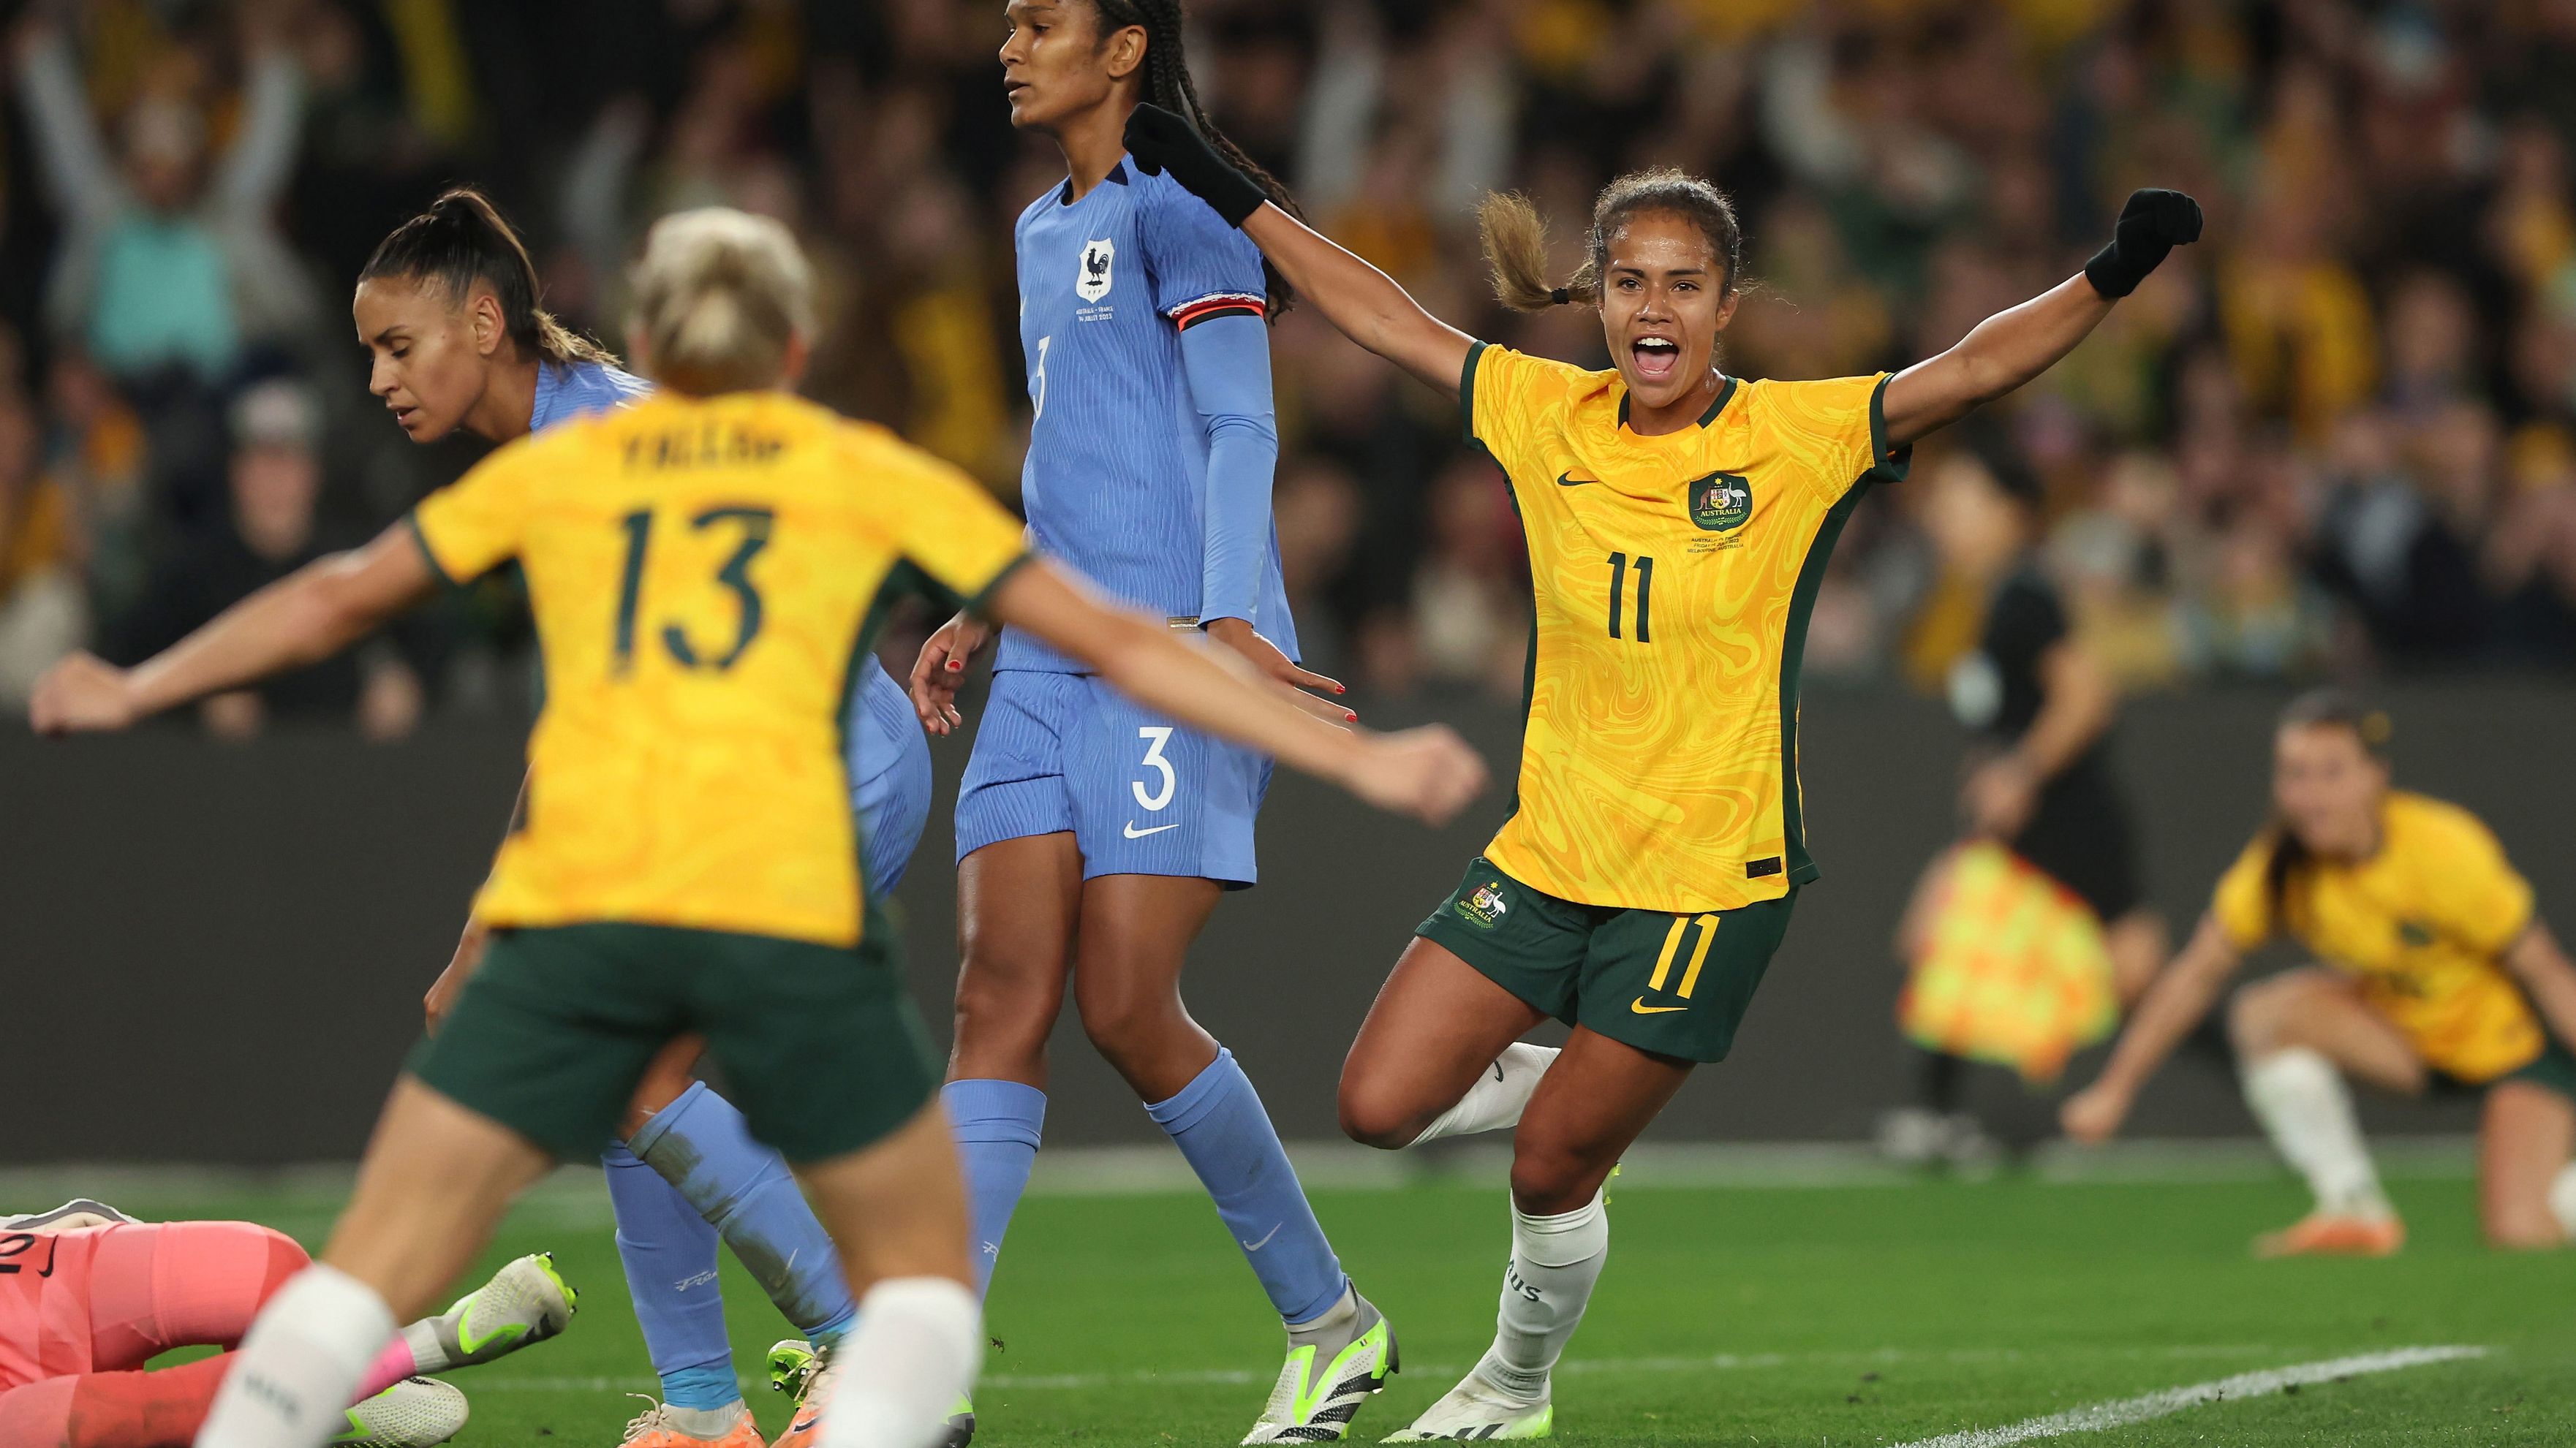 Matildas star Mary Fowler celebrates scoring a goal against France in the World Cup warm-up match in Melbourne.